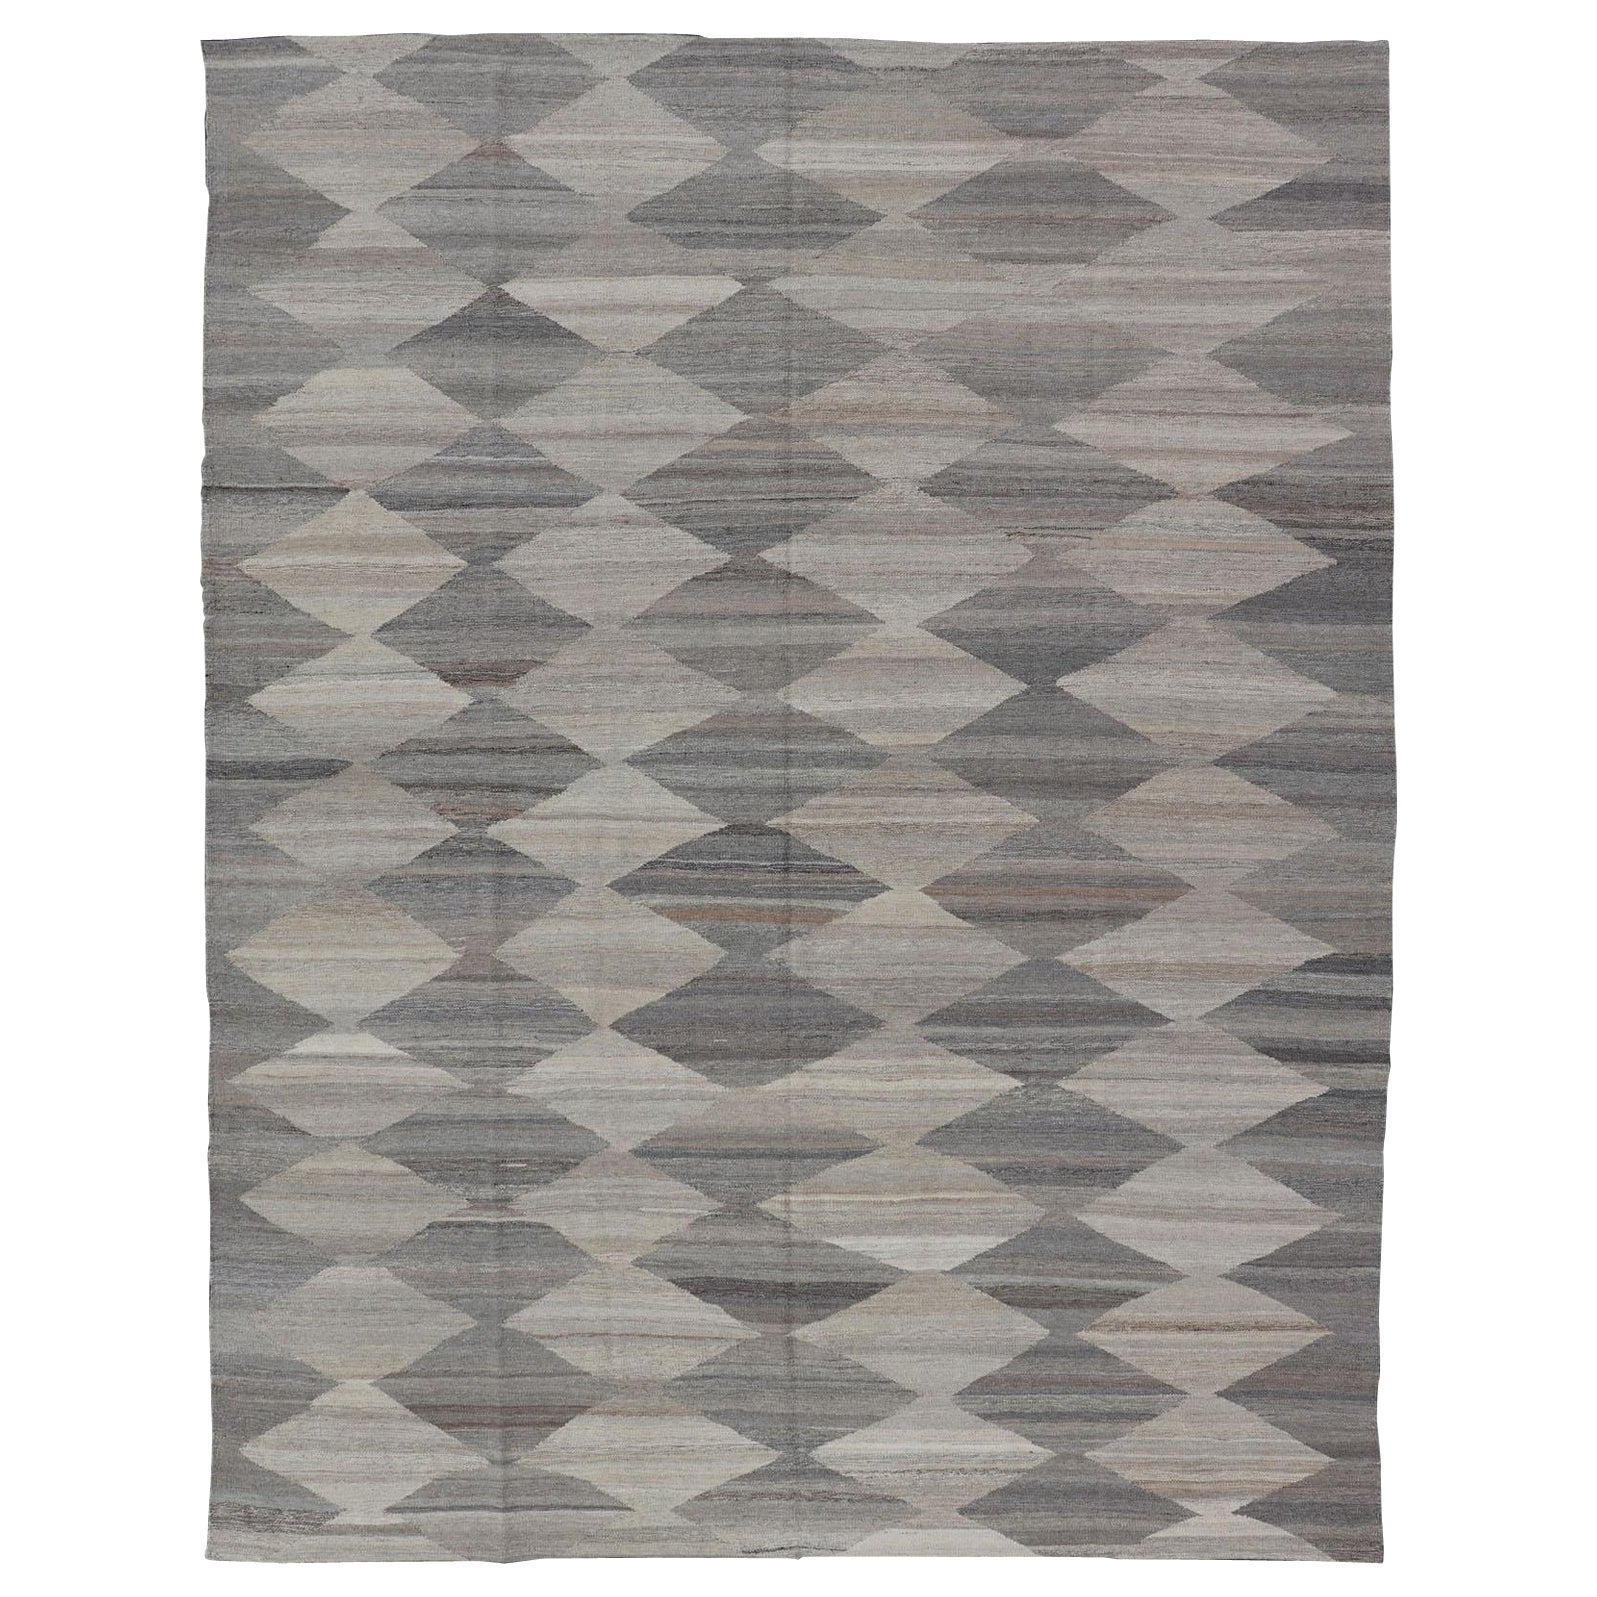 Large Pattern with All-Over Modern Design Flat-Weave Kilim in Natural Tones 